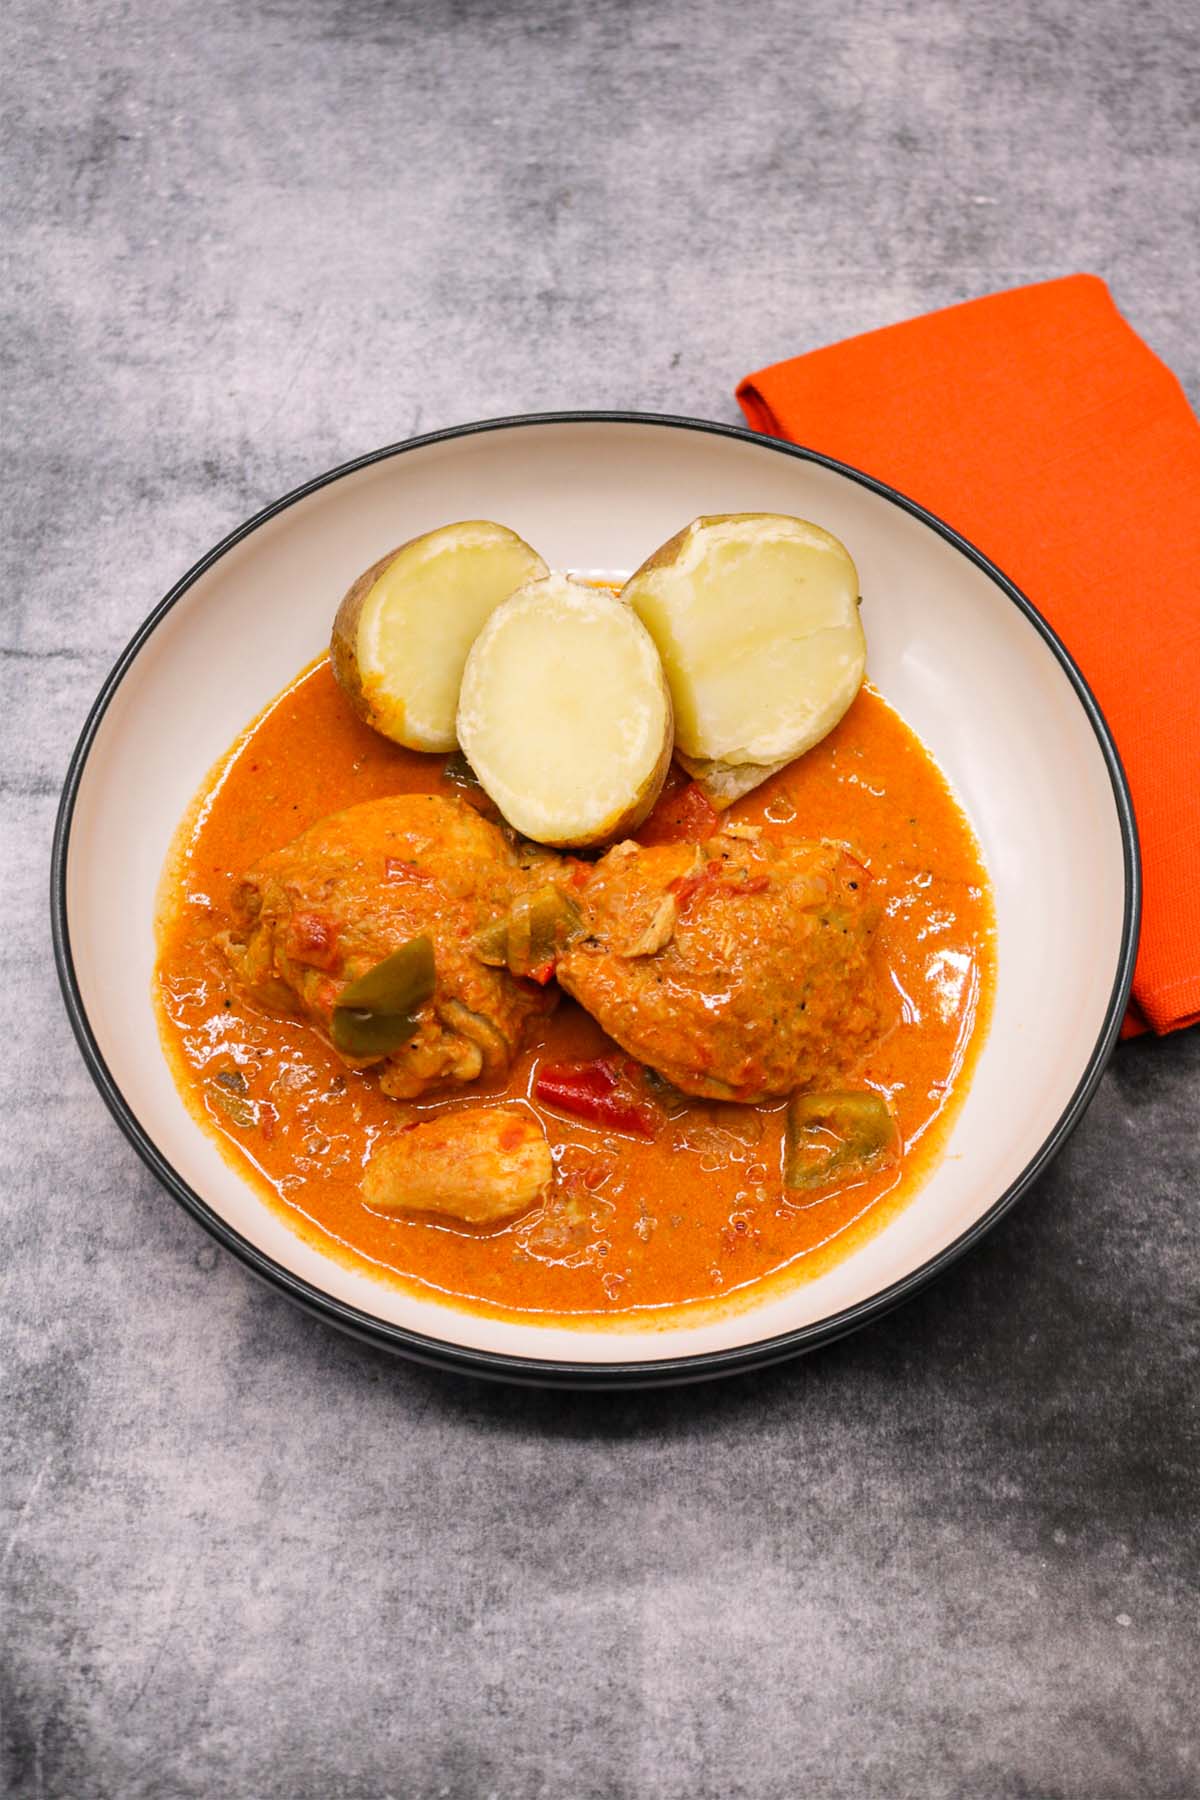 Chicken paprikash in bowl with boiled potatoes